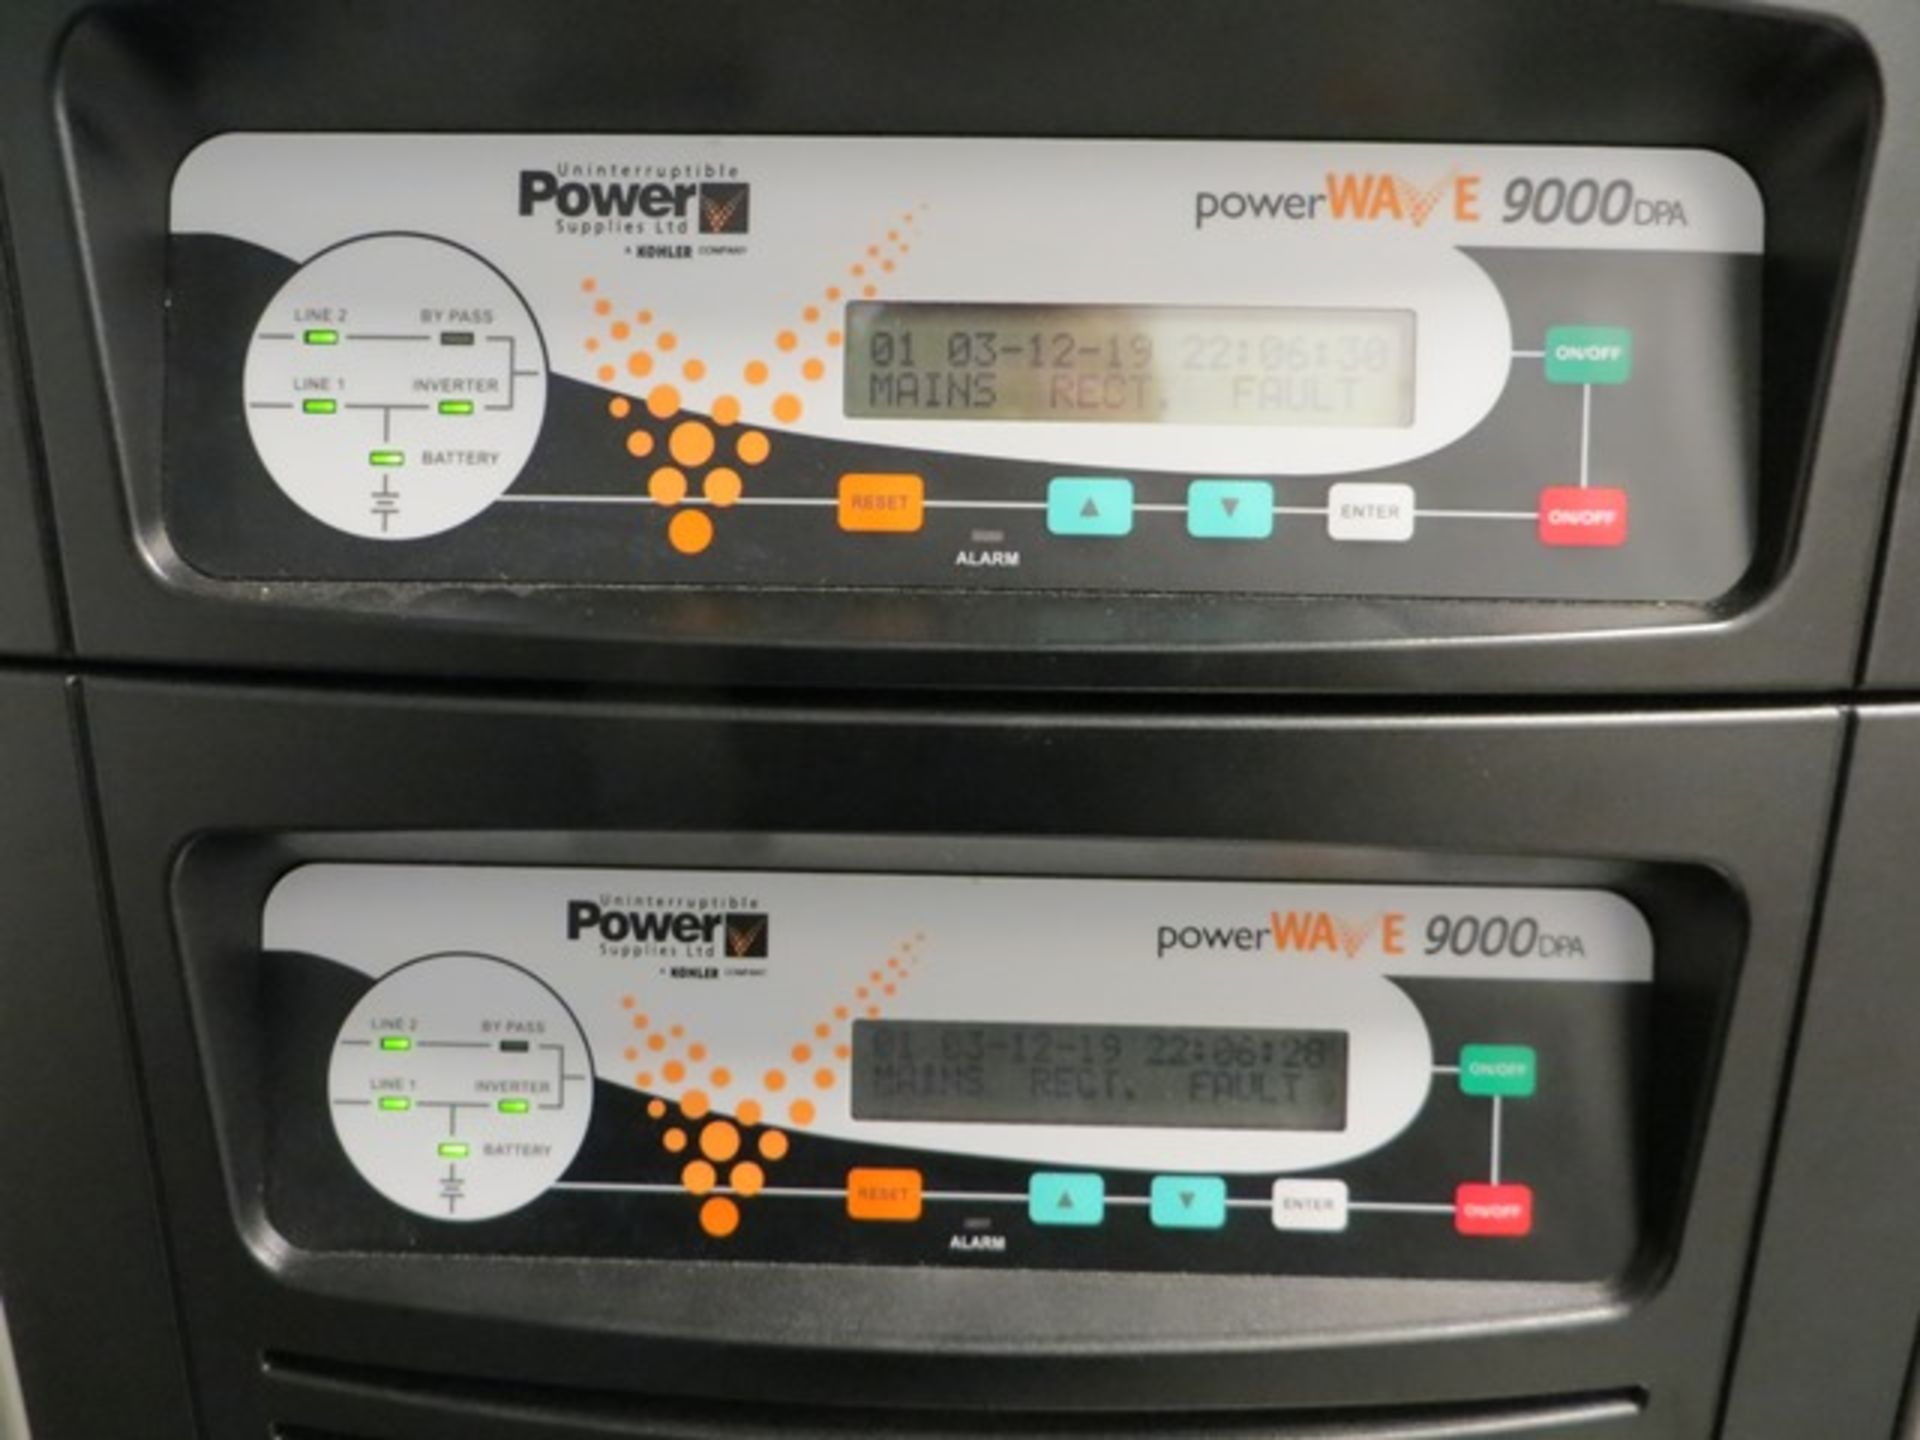 Kohler Power Wave PW9000DPA 2x 40KVA UPS s/n DPT 945. NB A work Method Statement and Risk Assessment - Image 2 of 5